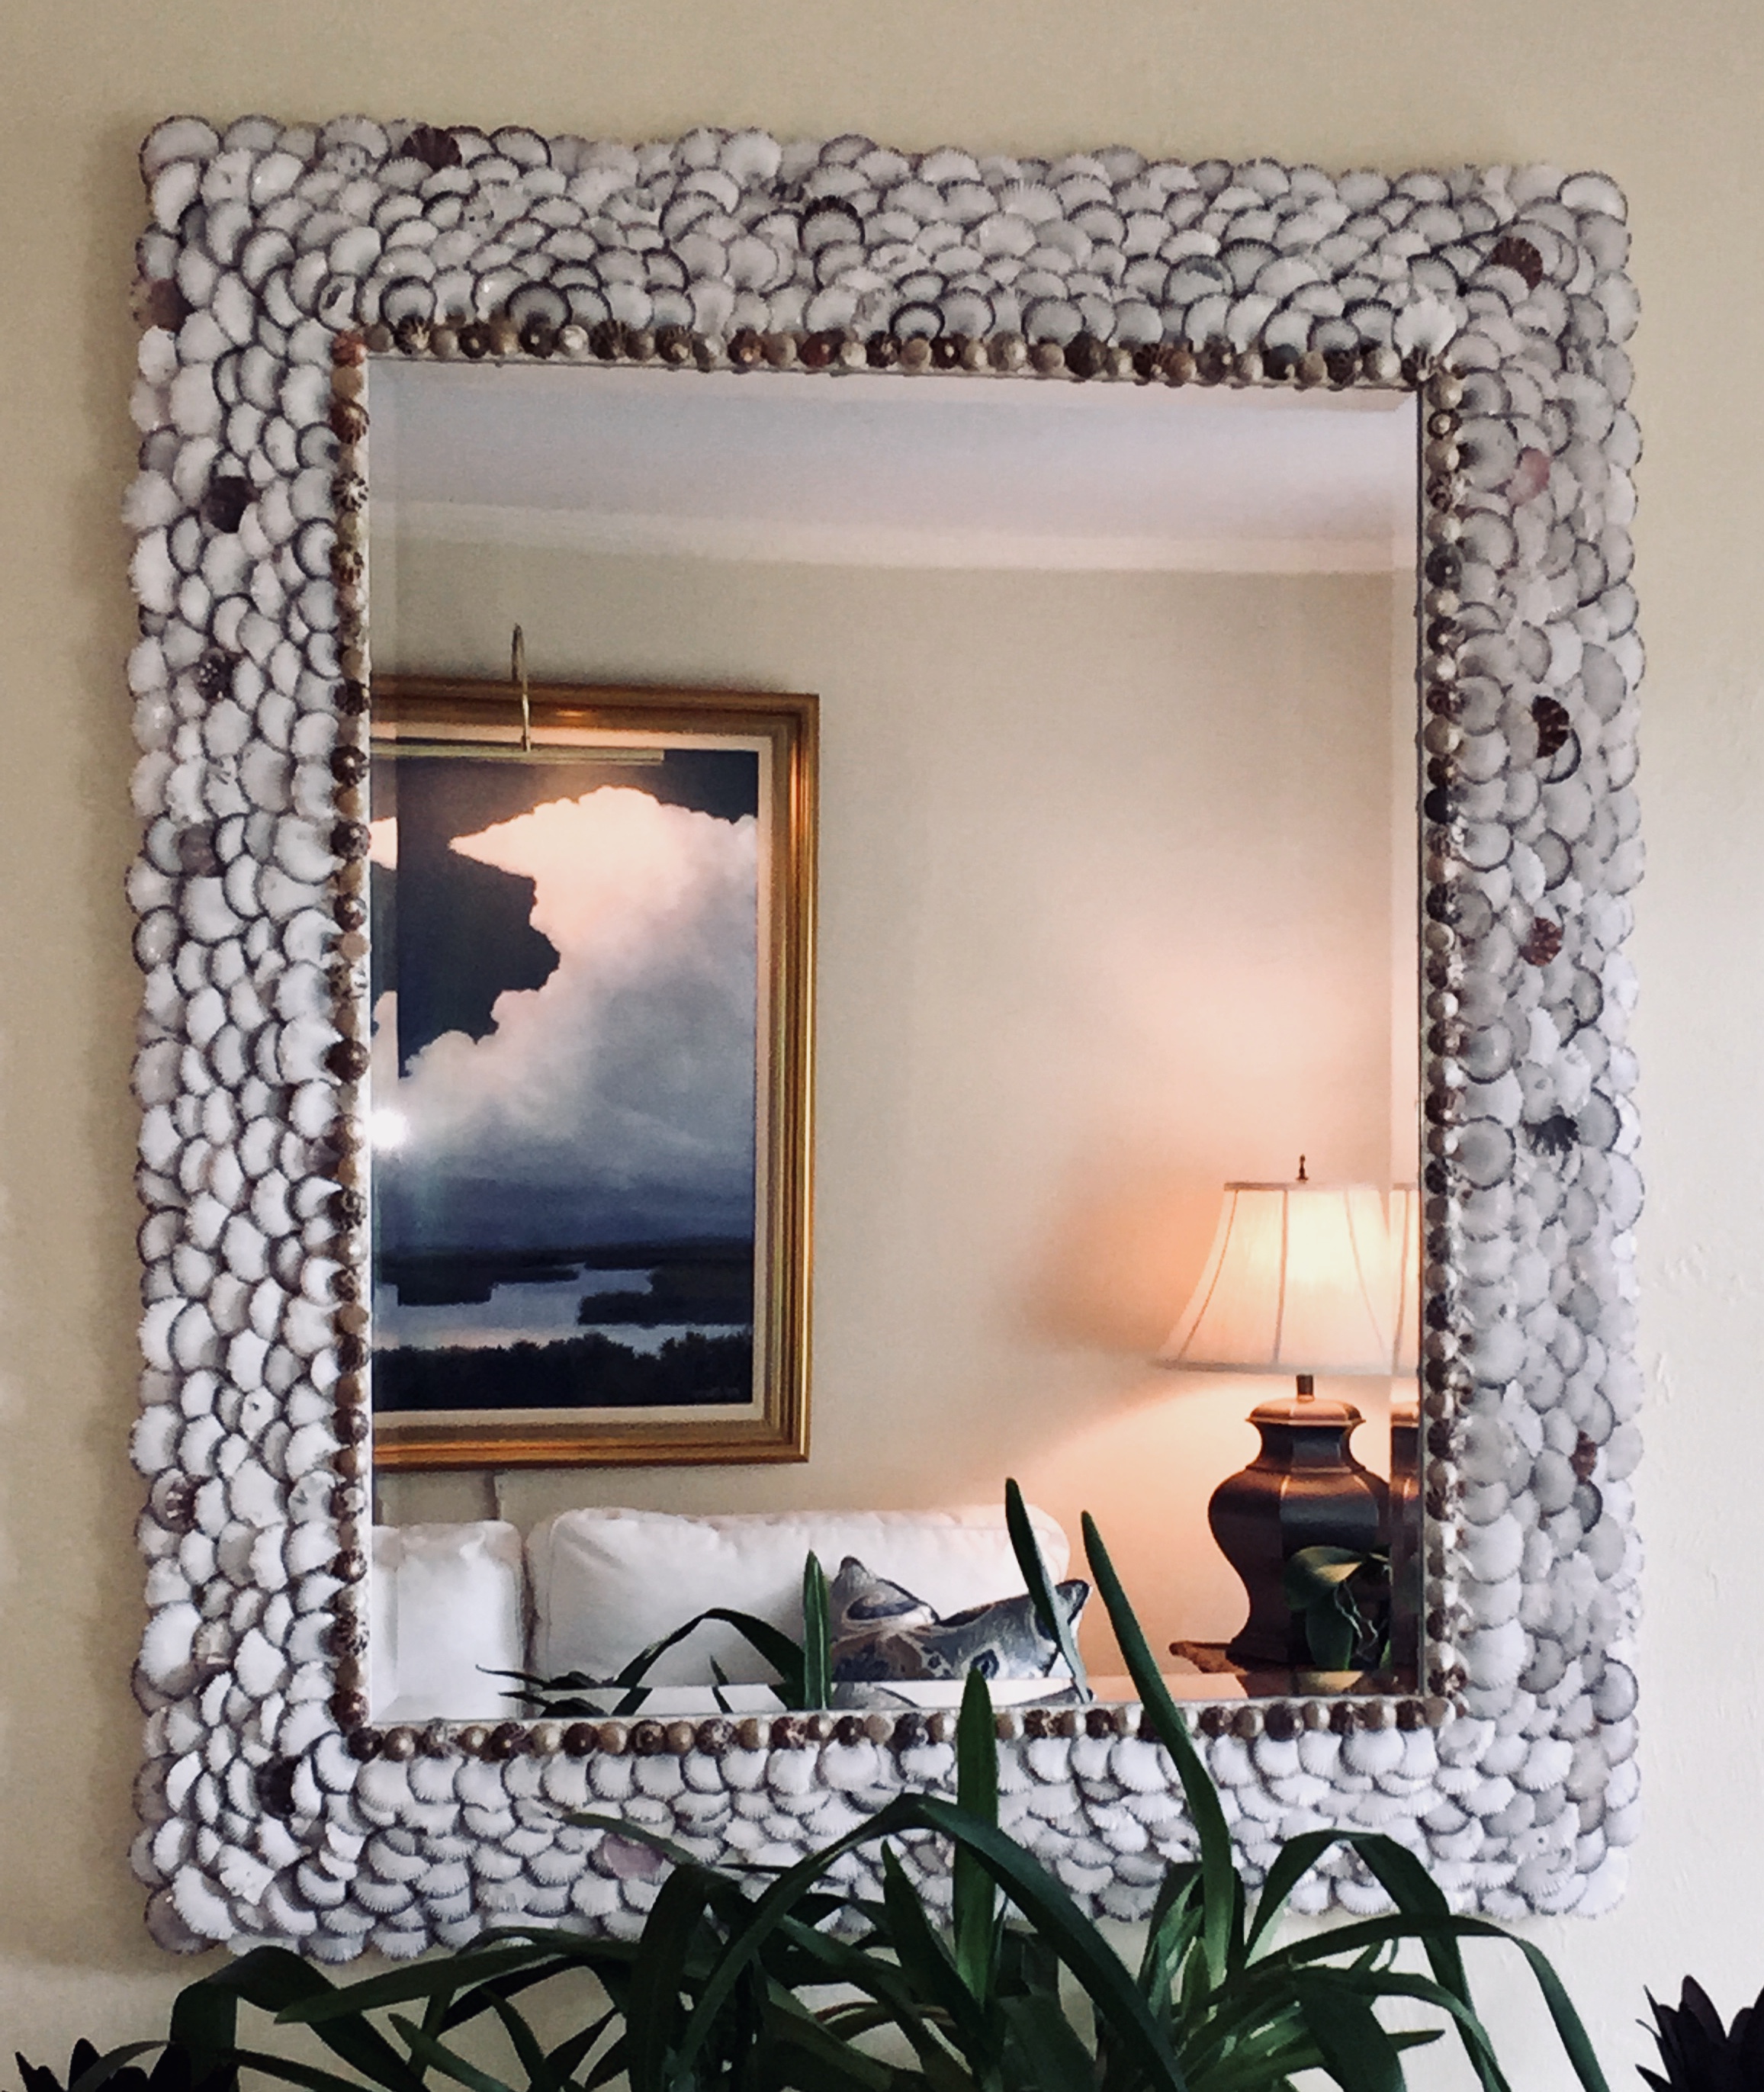 large shell mirror made with lavender scallop shells reflecting a painting with white clouds